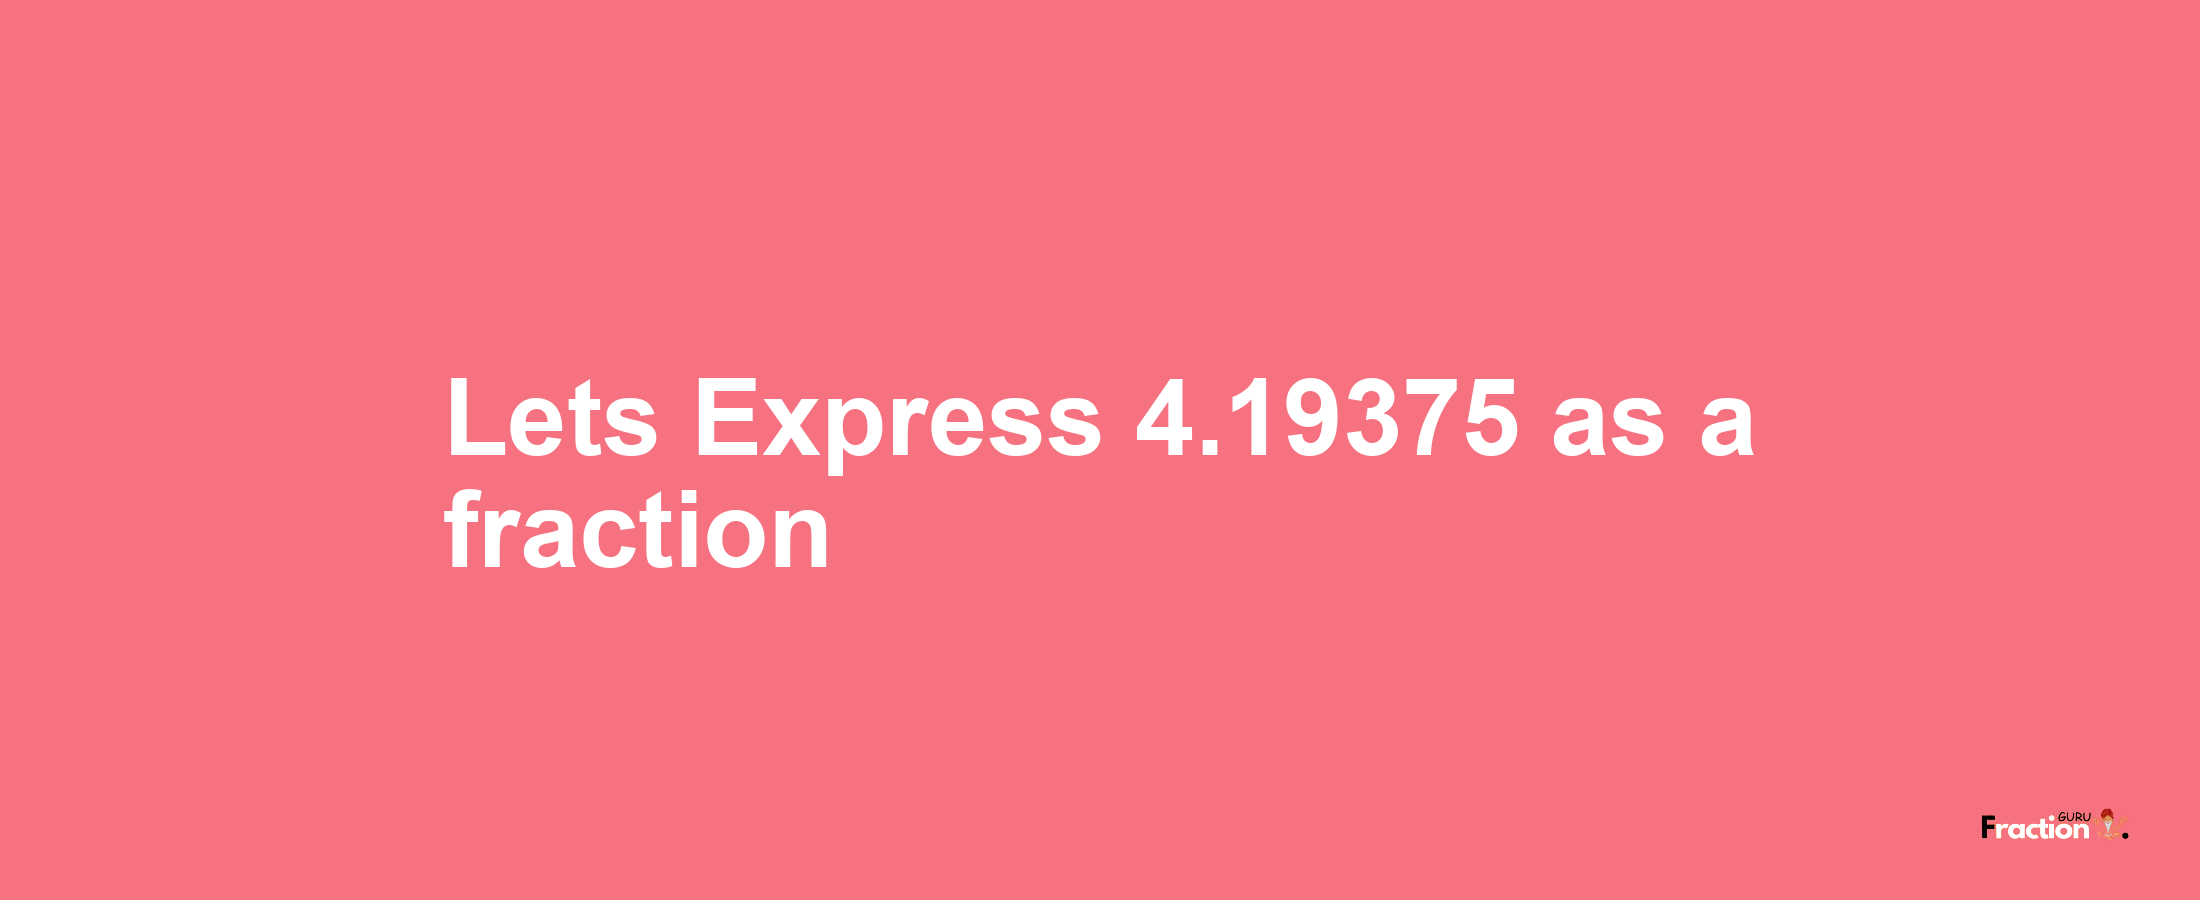 Lets Express 4.19375 as afraction